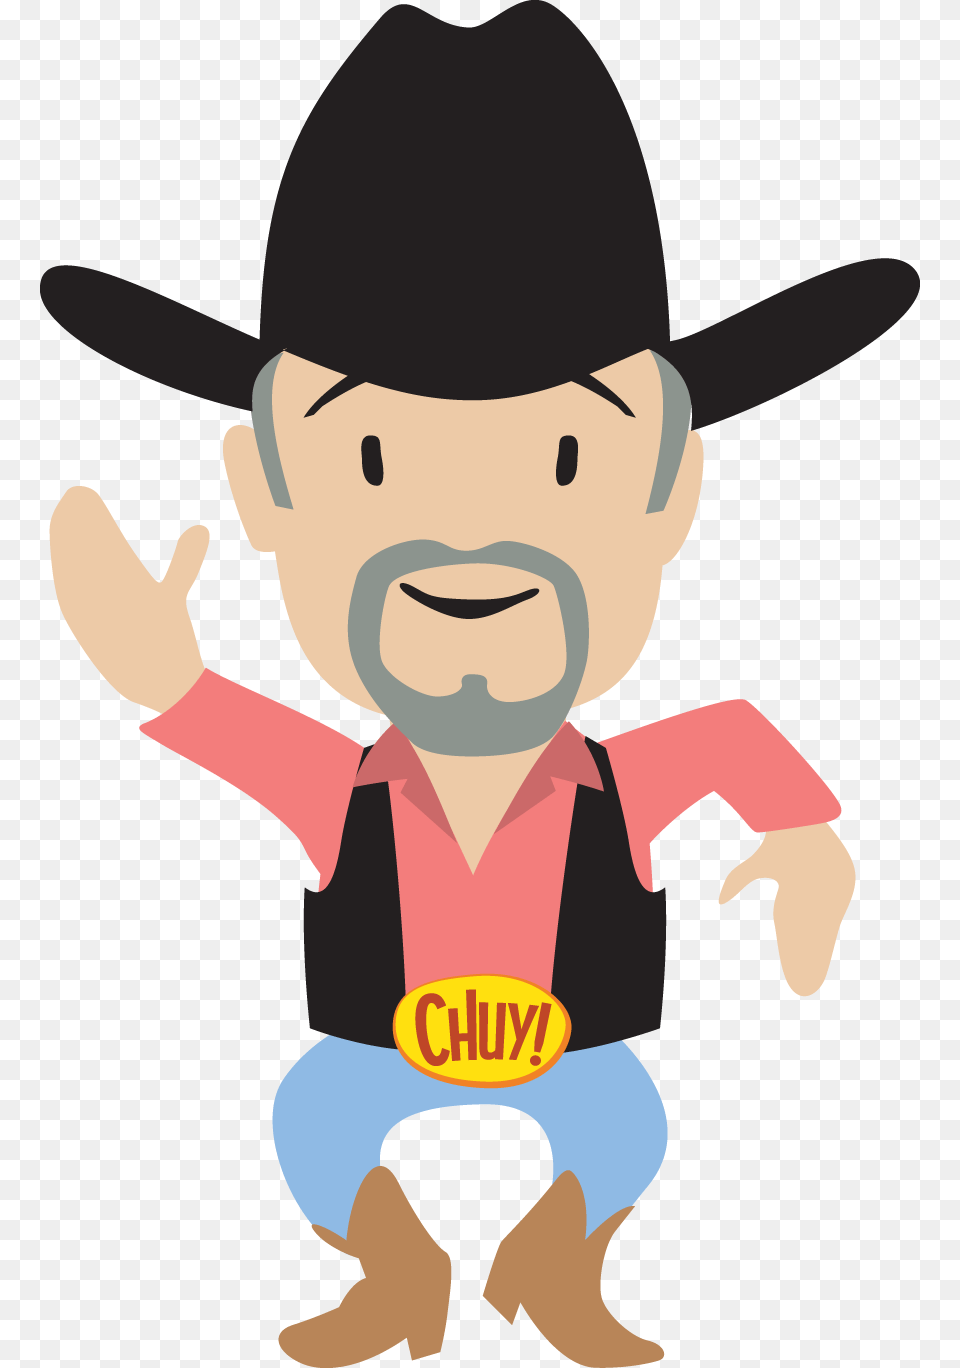 Chuy Salmon Shirt And Black Hat Shirt, Baby, Person, Face, Head Free Png